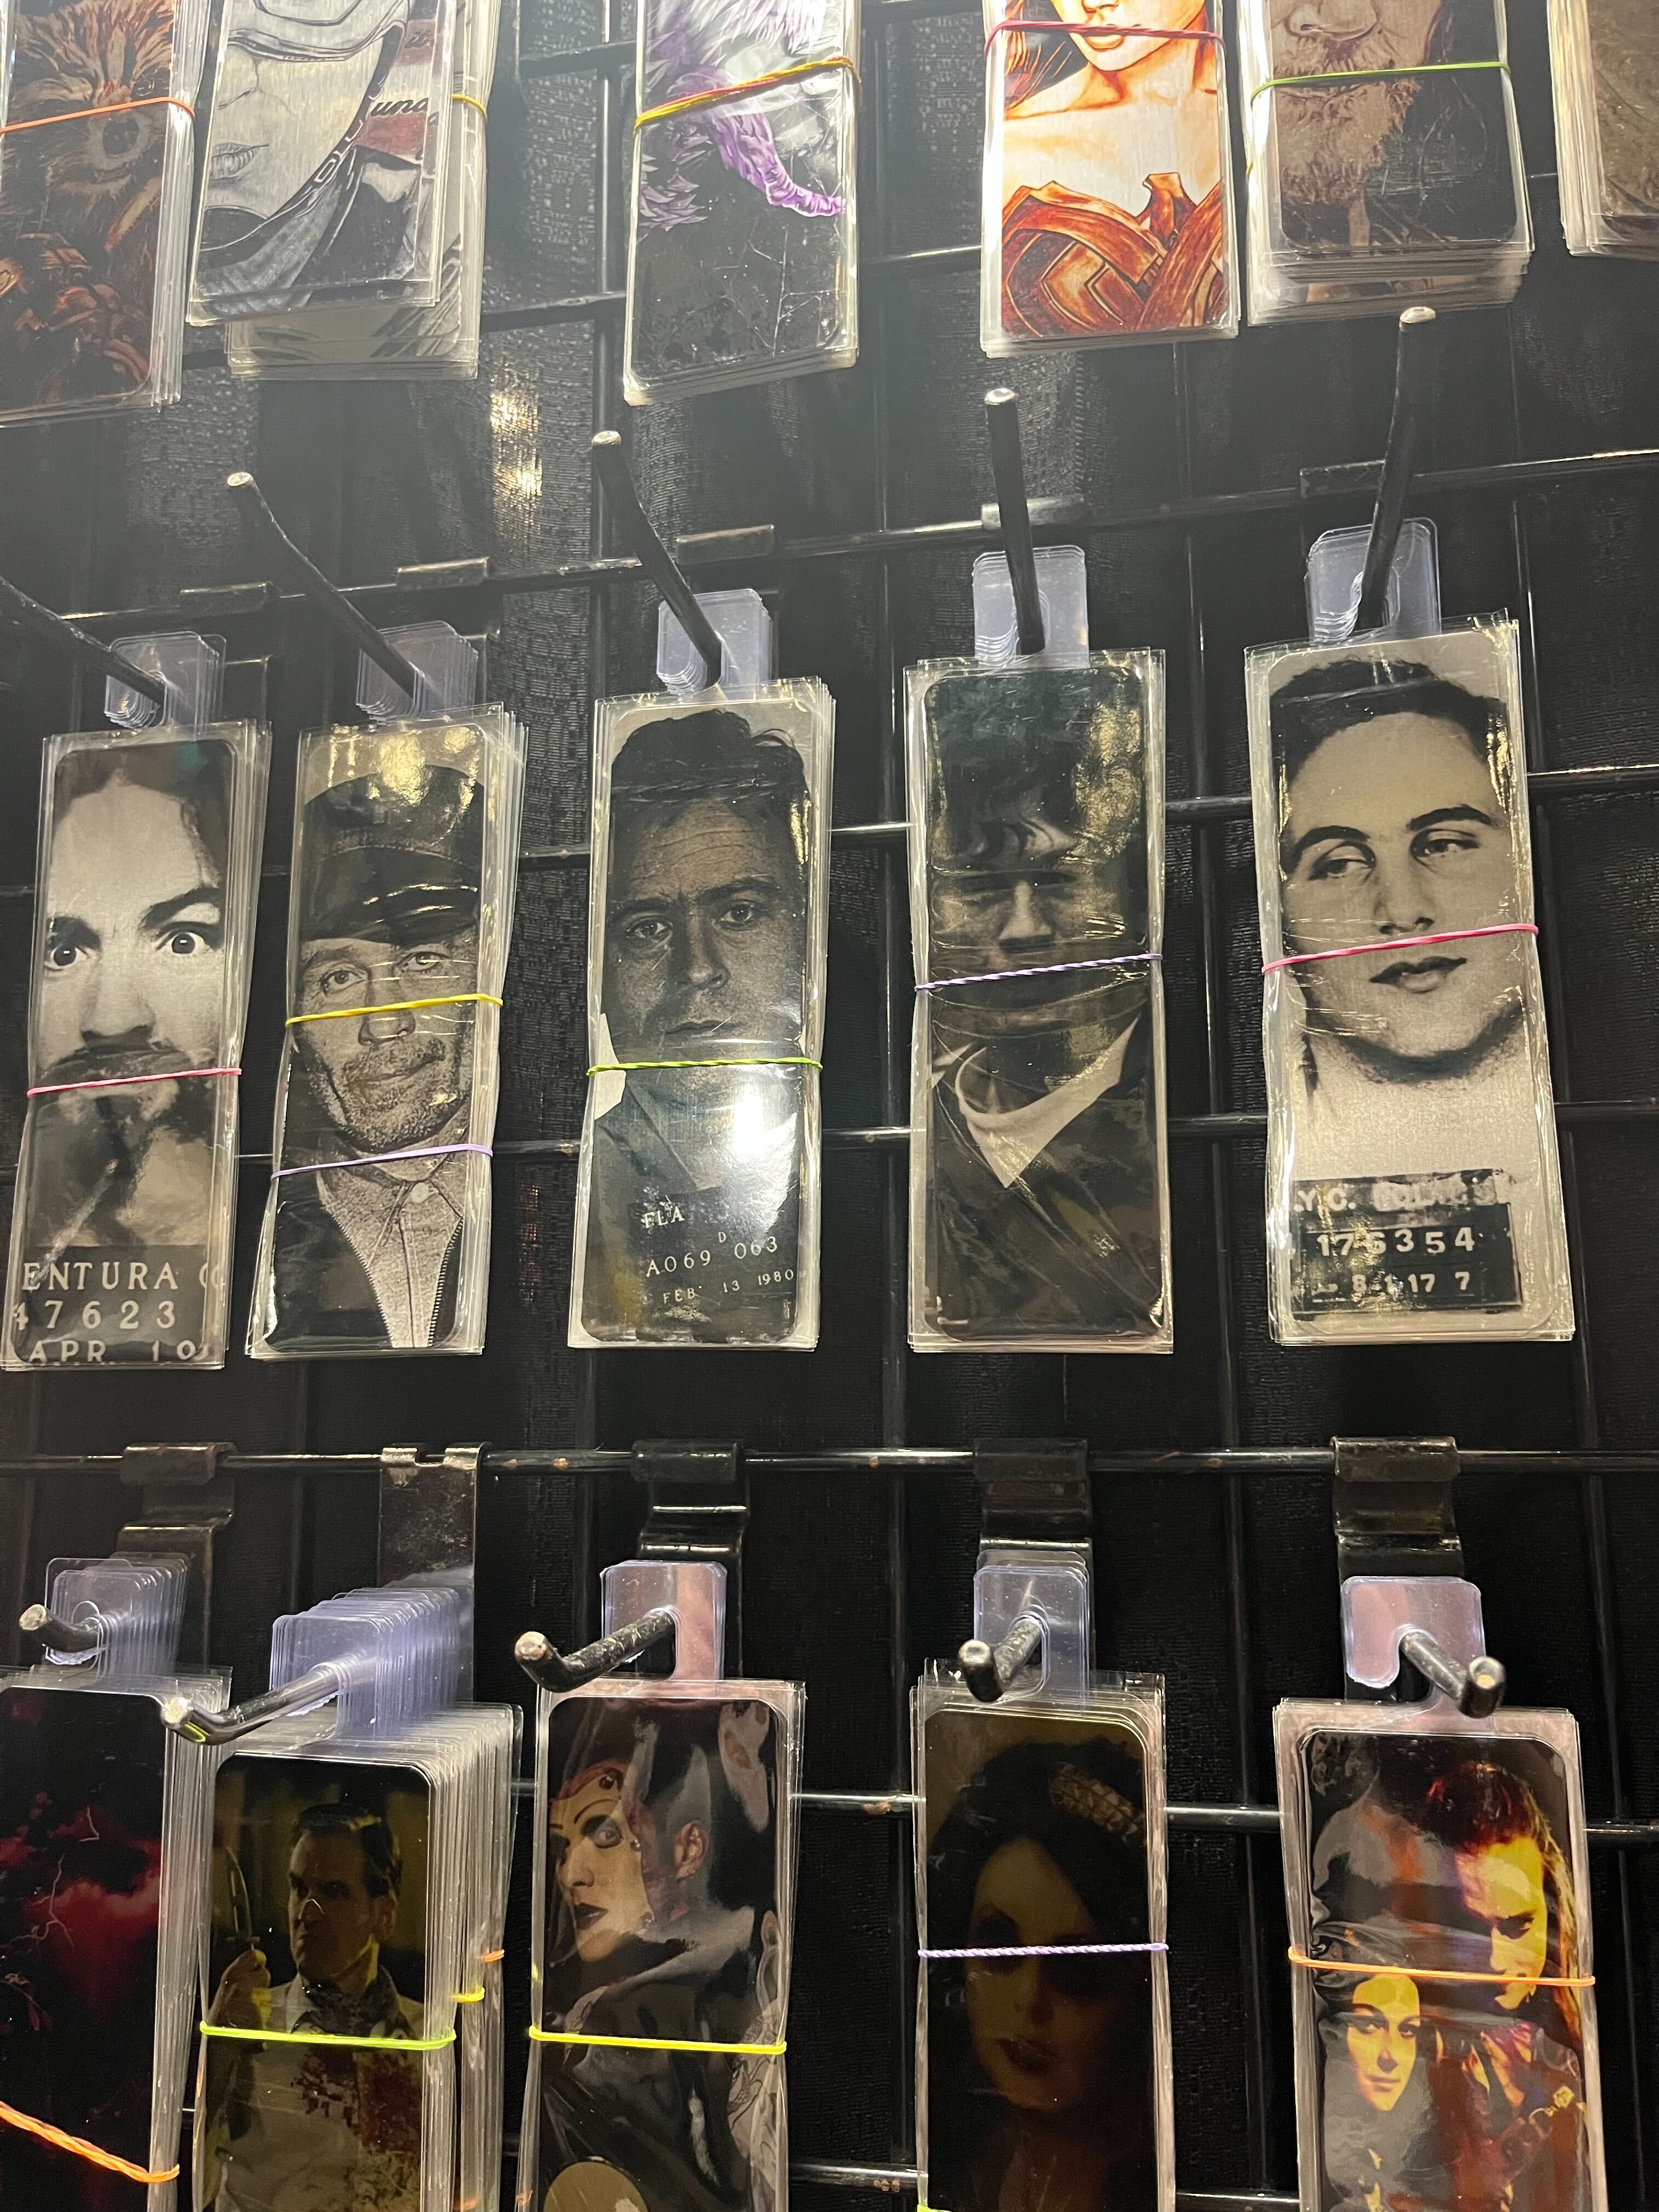 Serial killer bookmarks. Maybe we're better off without these.